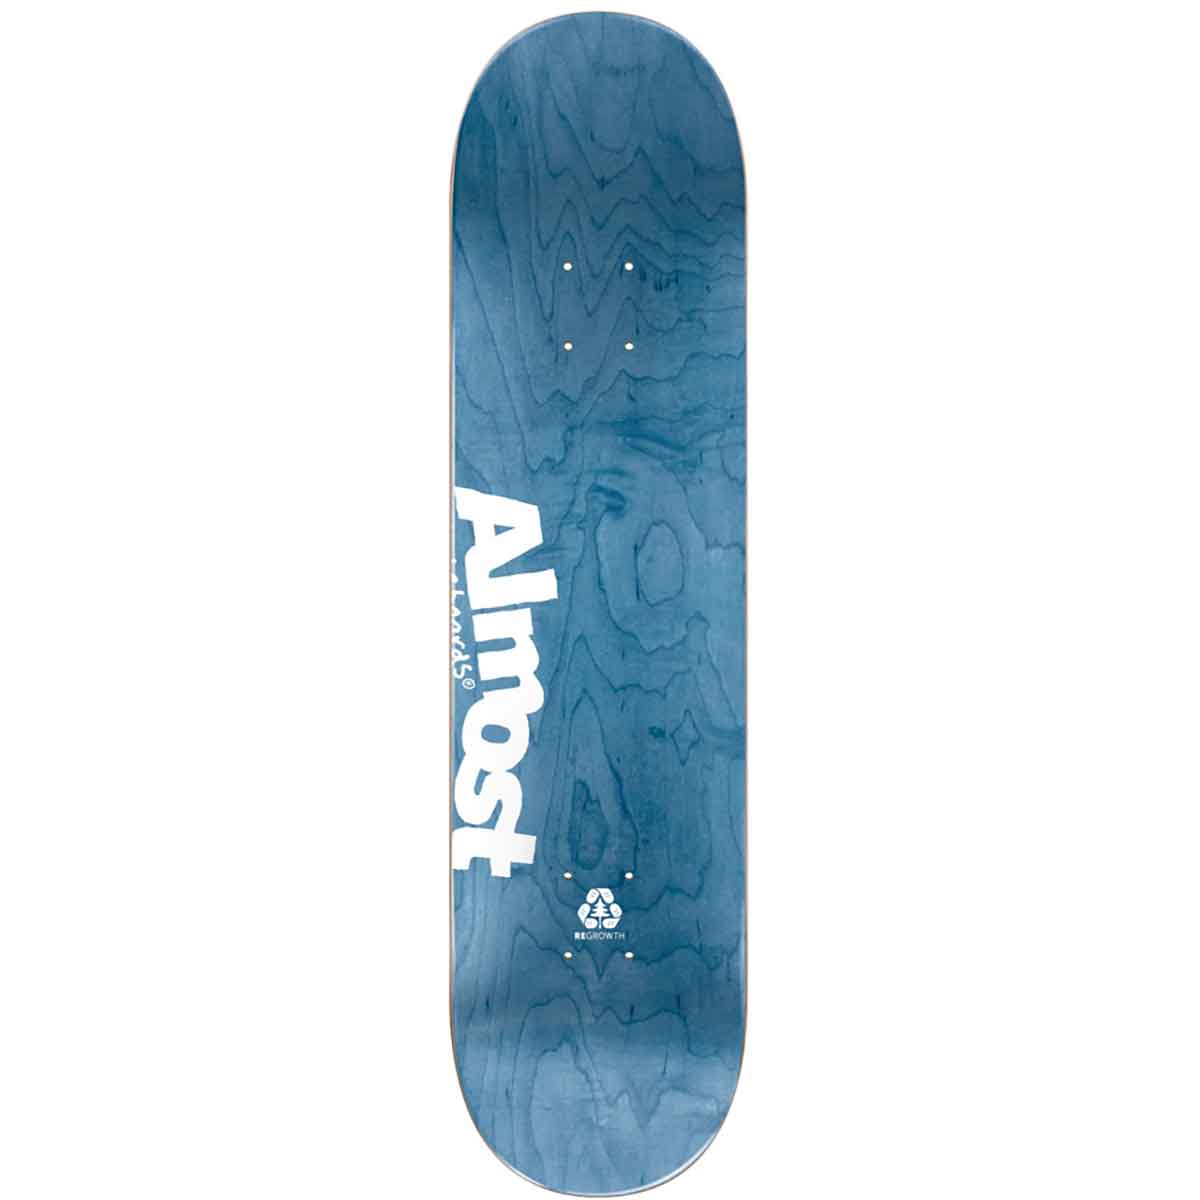 Almost Ring Games Impact Skateboard Deck 8.25 inch Youness Amrani 